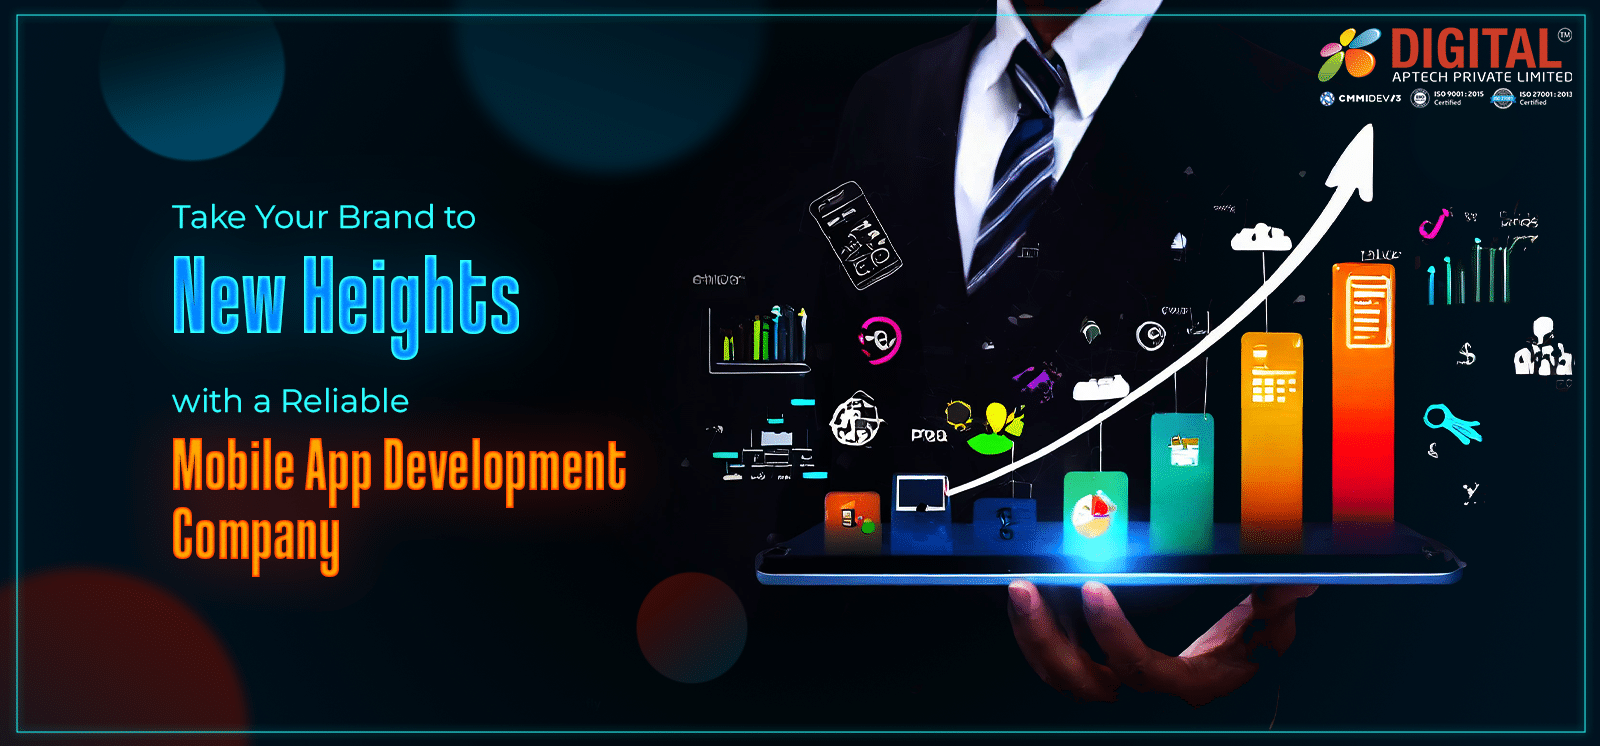 Take Your Brand to New Heights with a Reliable Mobile App Development Company